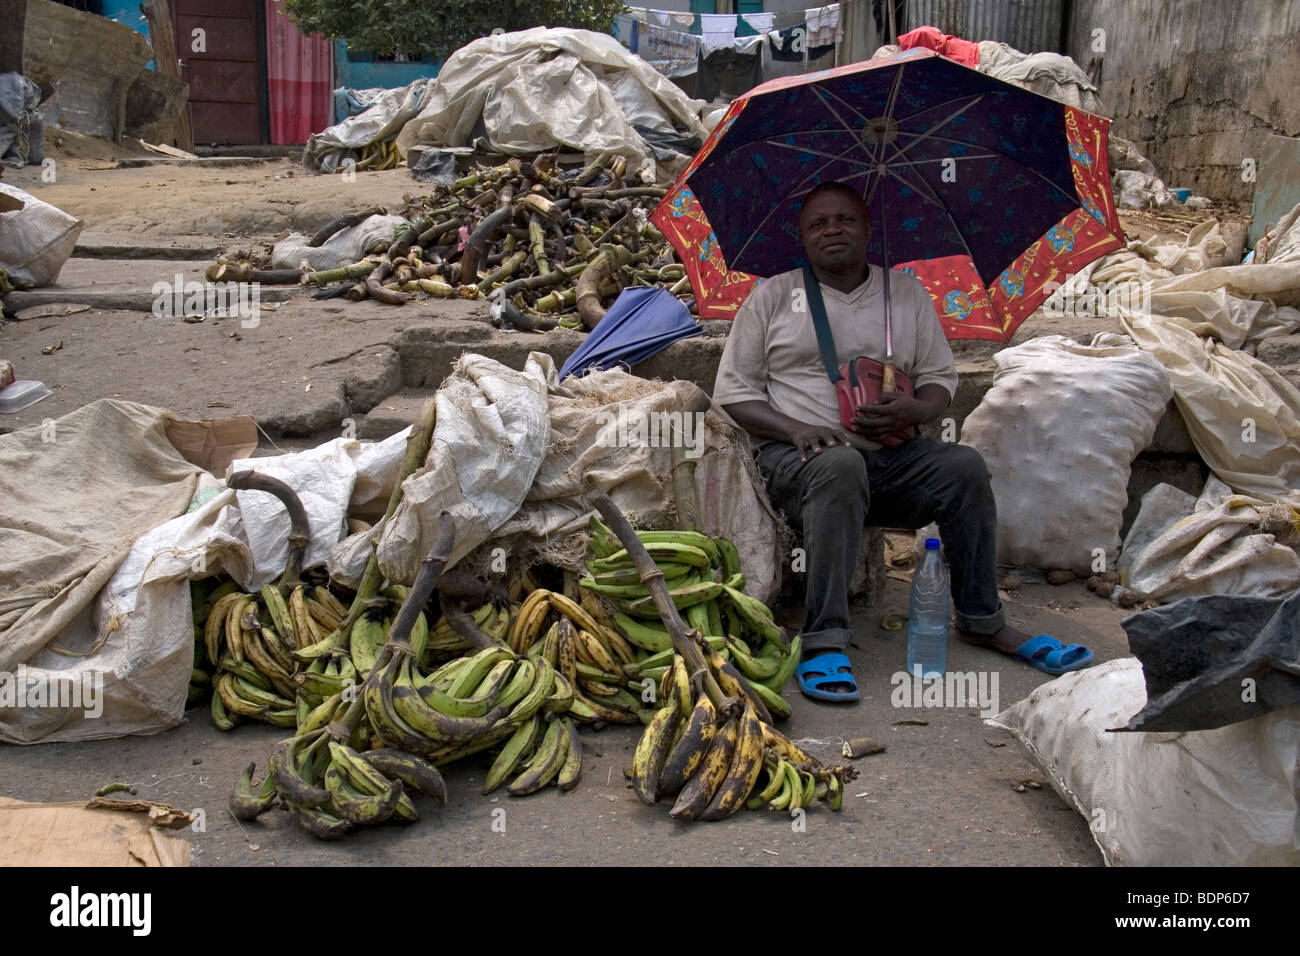 Woman selling plantain at street market in poor neighborhood of Grand Moulin Douala Cameroon West Africa Stock Photo